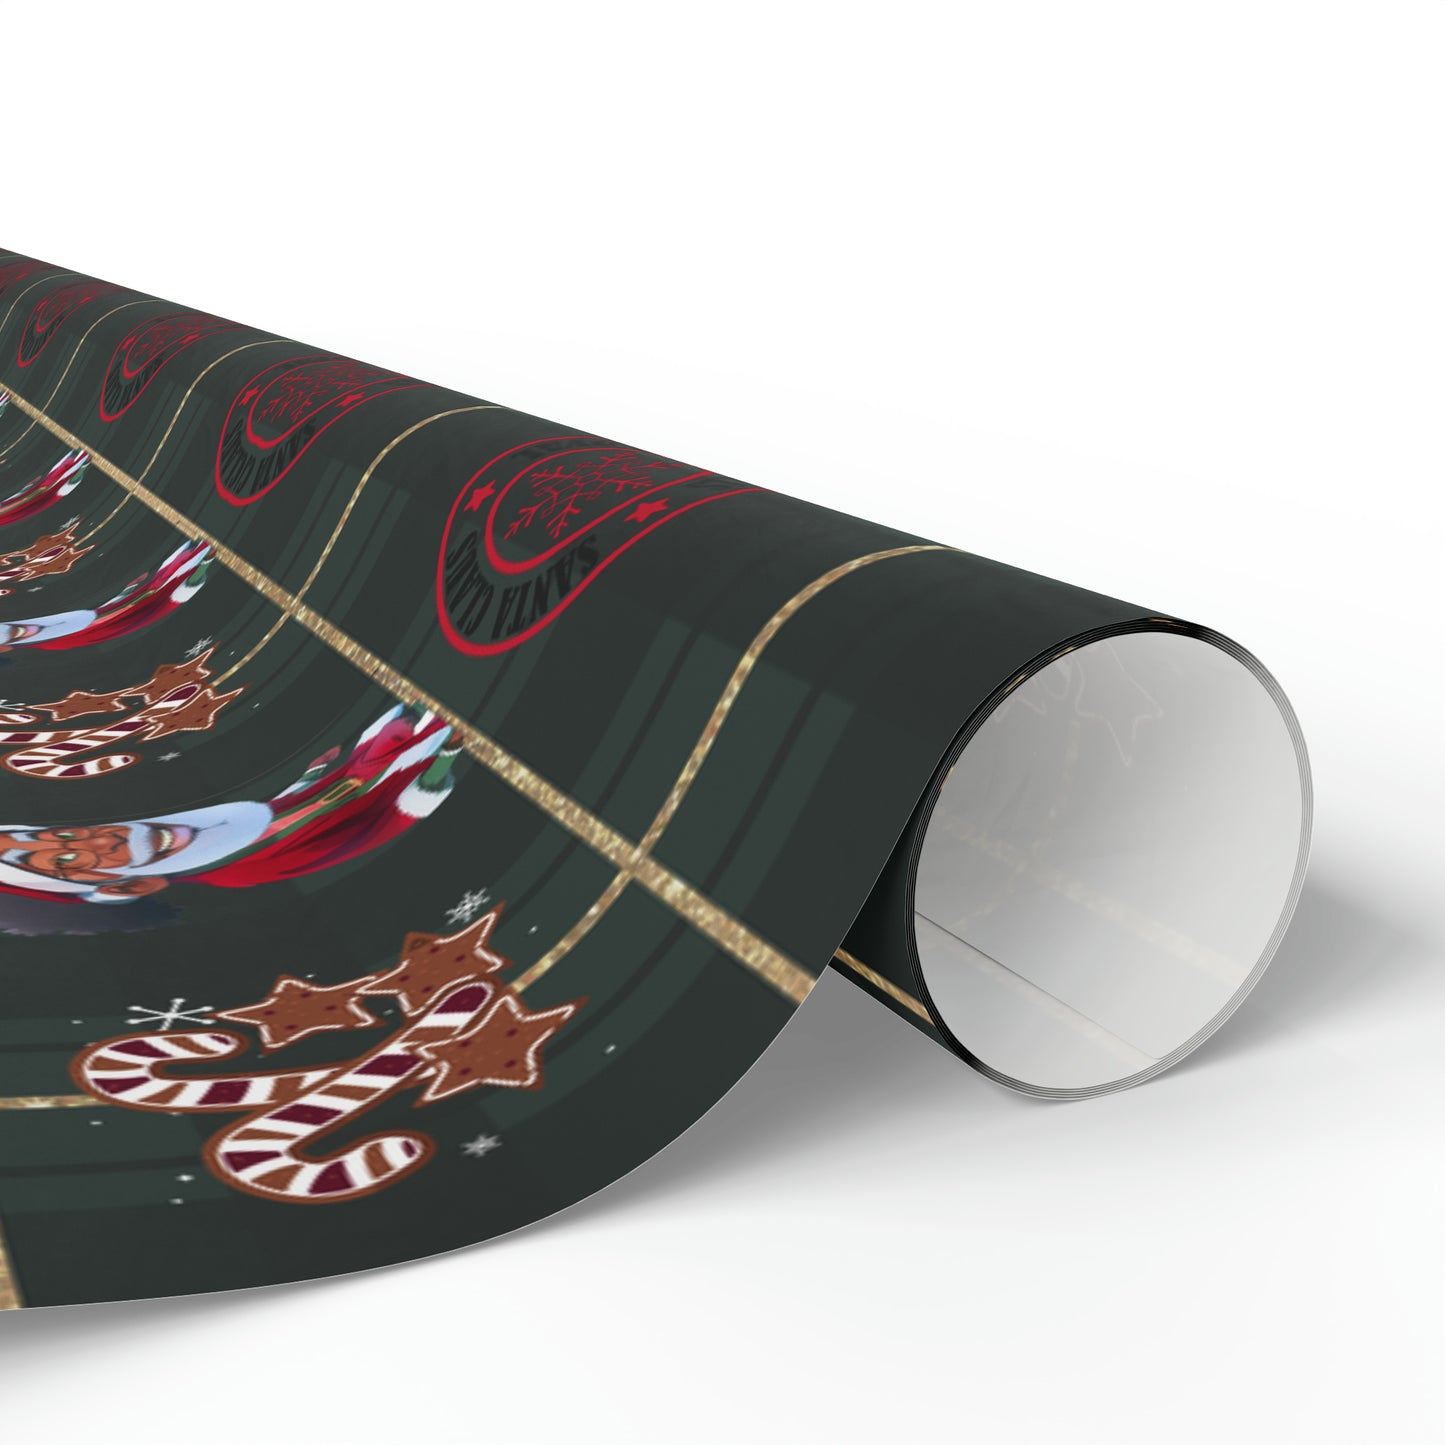 Santa Claus Approved Wrapping Paper